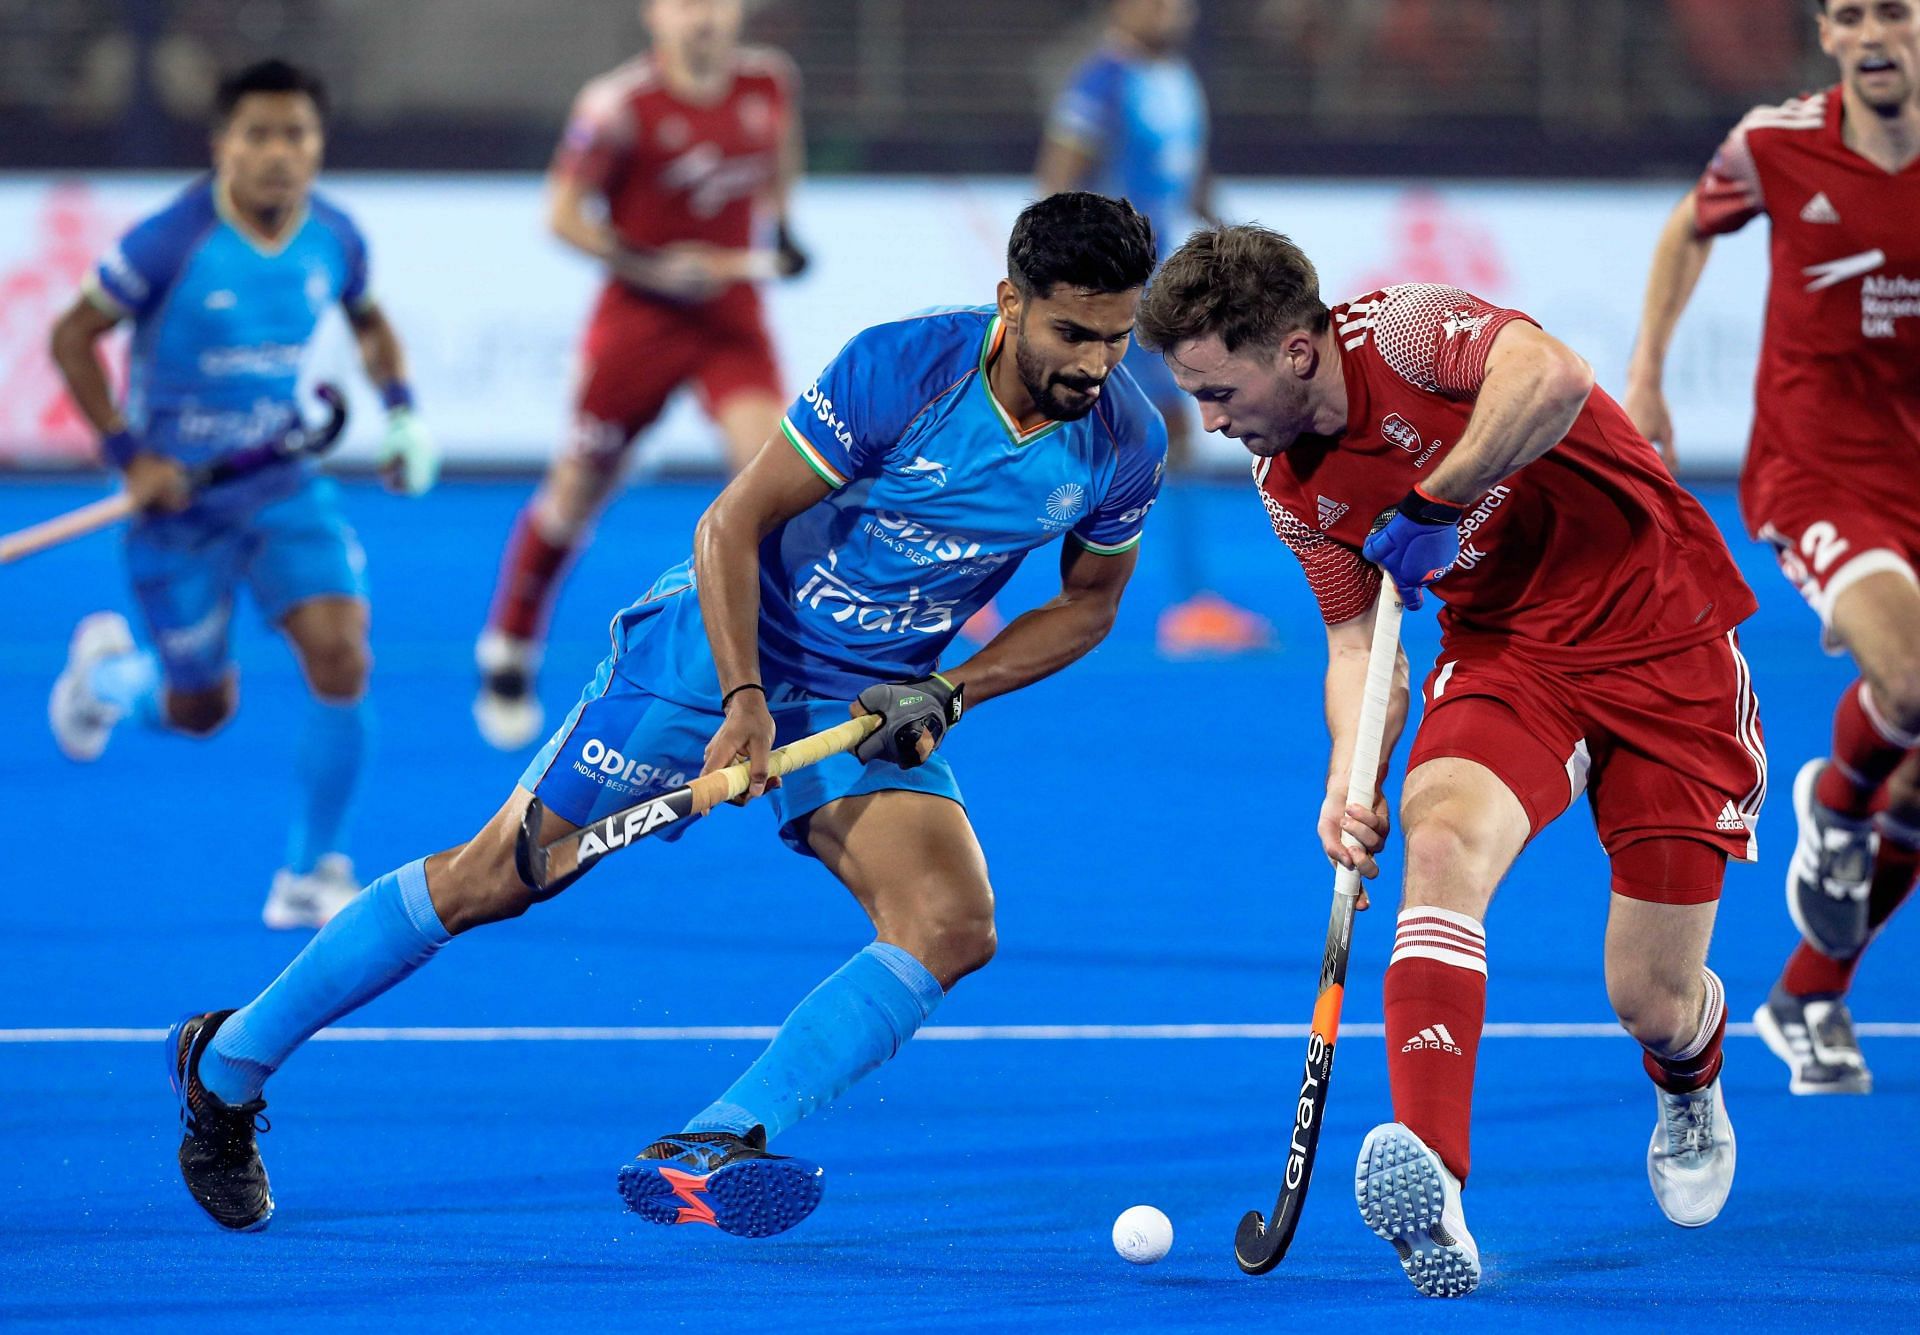 India and England teams in action in an earlier match (Image Courtesy: Twitter/Hockey India)